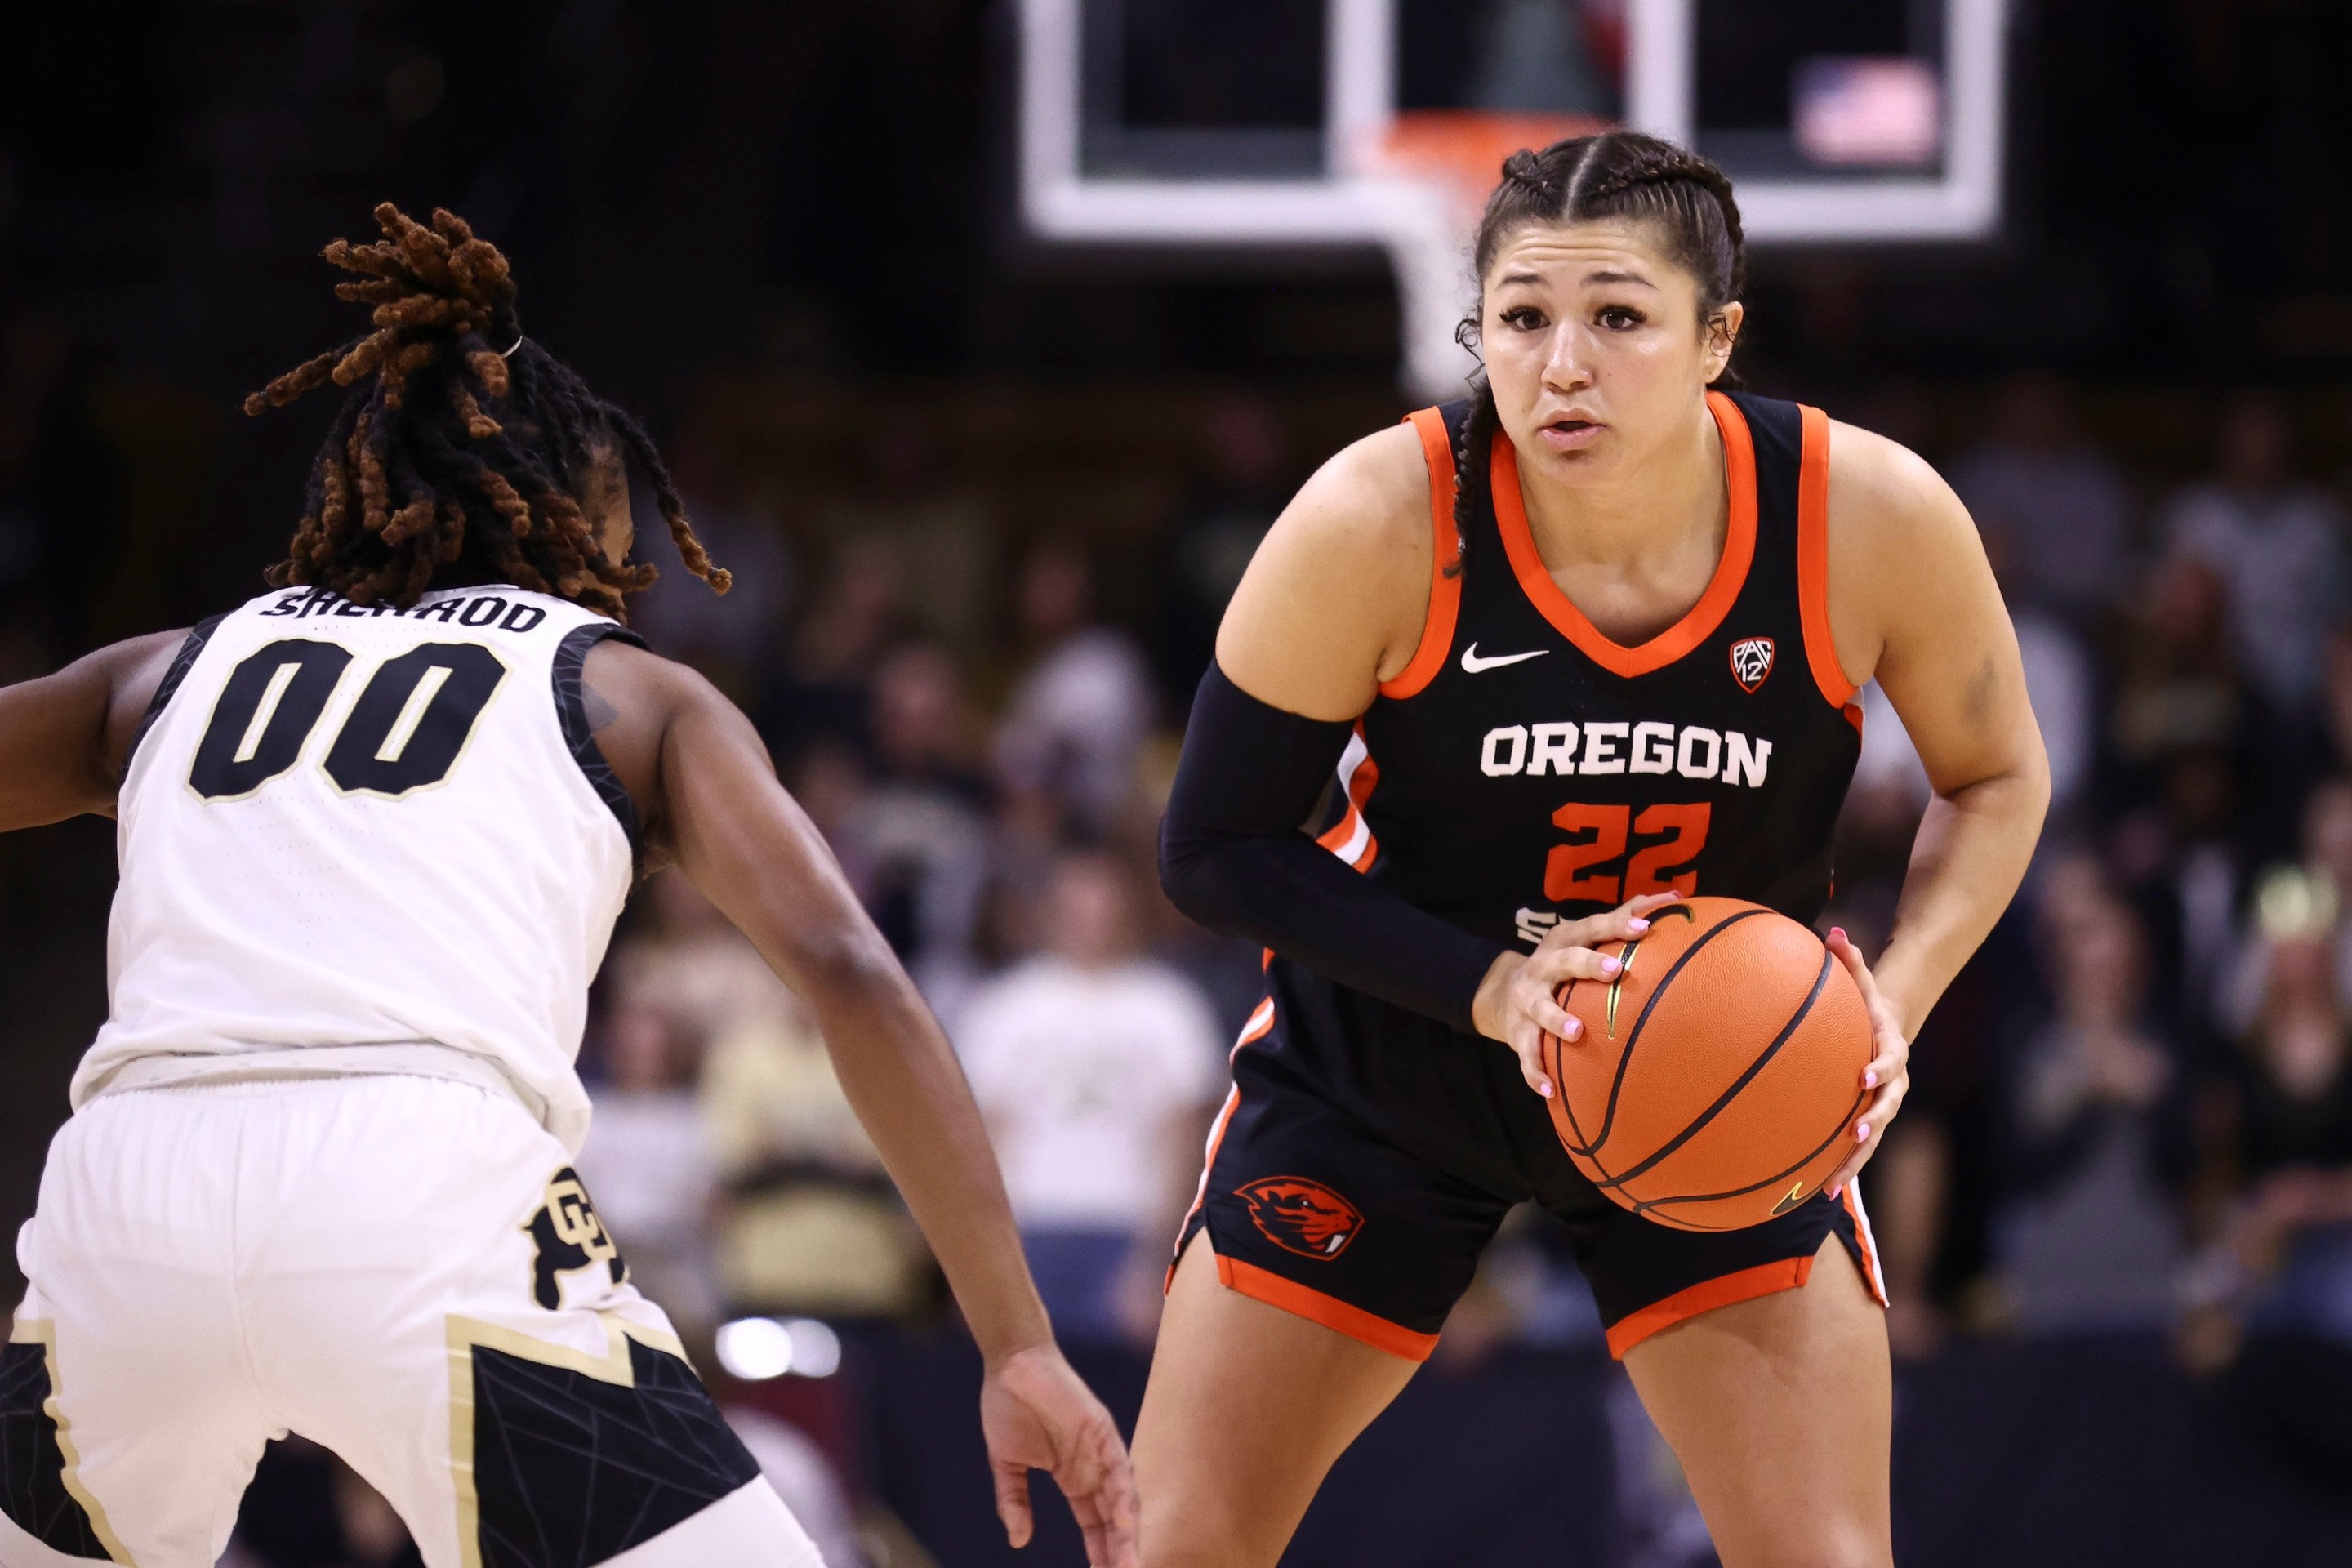 BOULDER, COLORADO - FEBRUARY 11: Talia von Oelhoffen #22 of the Oregon State Beavers looks to pass around Jaylyn Sherrod #00 of the Colorado Buffaloes in the first half at the CU Events Center on February 11, 2024 in Boulder, Colorado. (Photo by Tyler Schank/Getty Images)